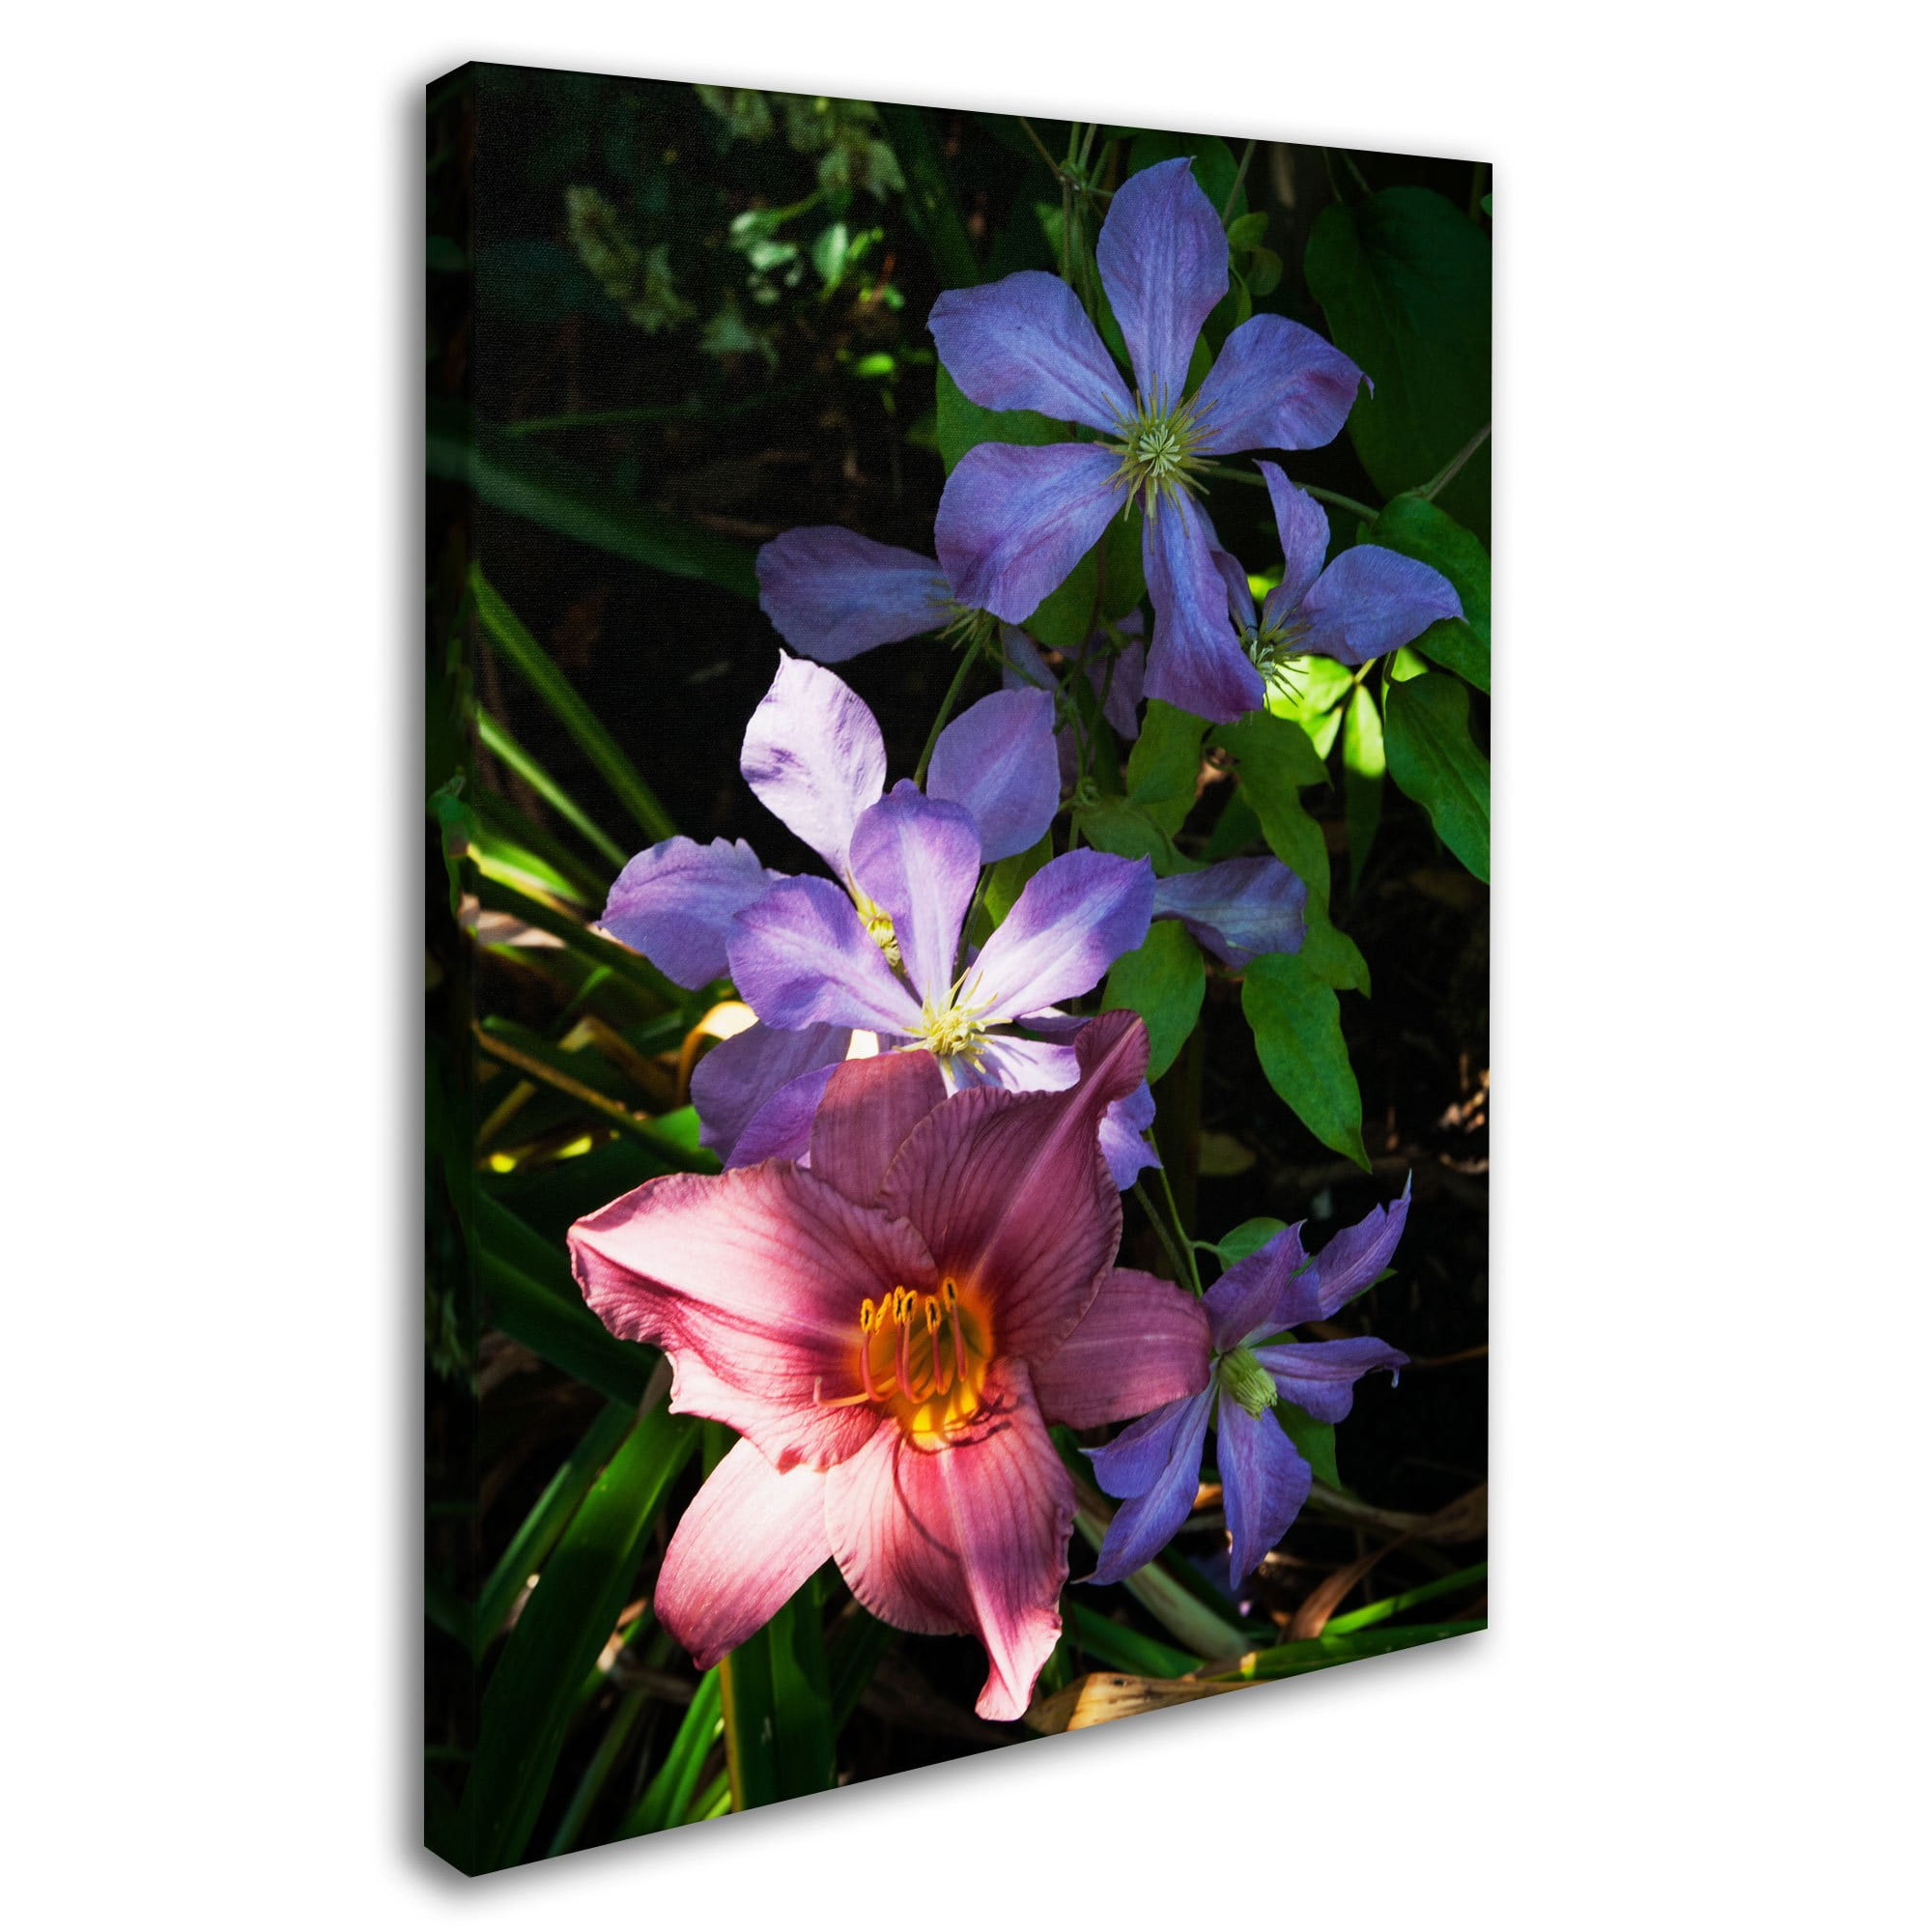 Clematis and Lily by Kurt Shaffer Black Frame 11x14-Inch 